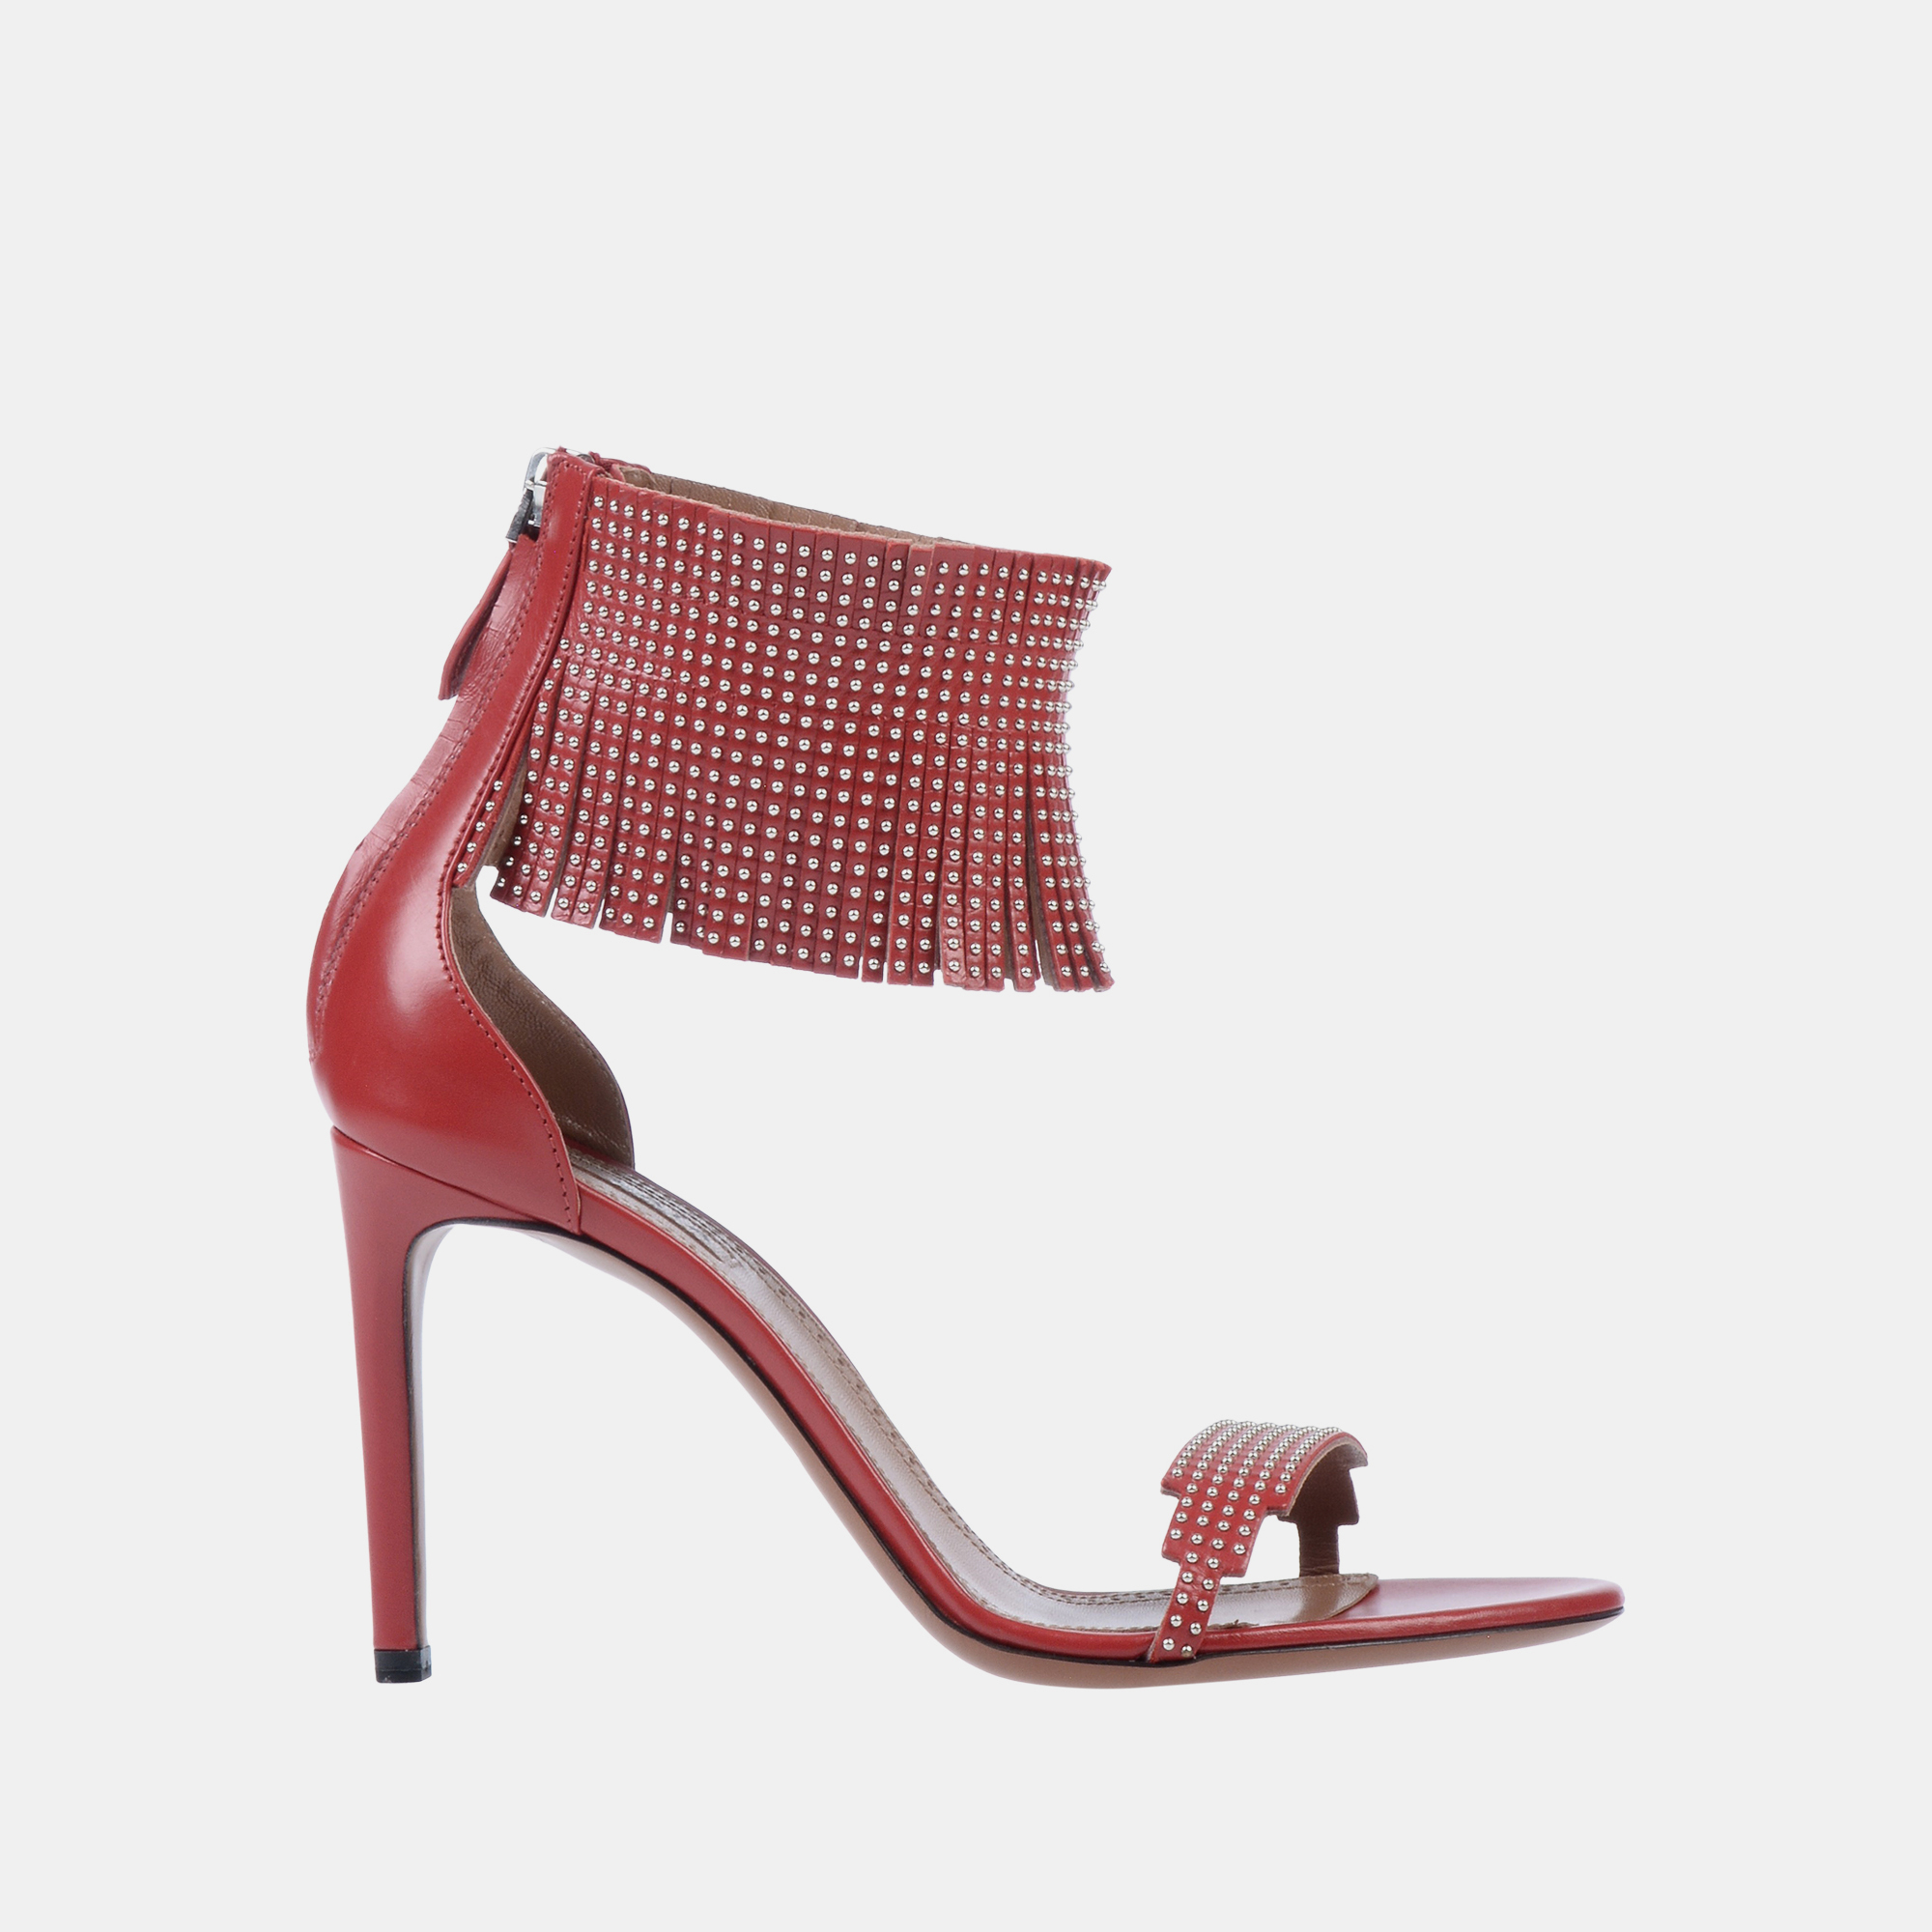 Alaia red leather ankle strap sandals size 36